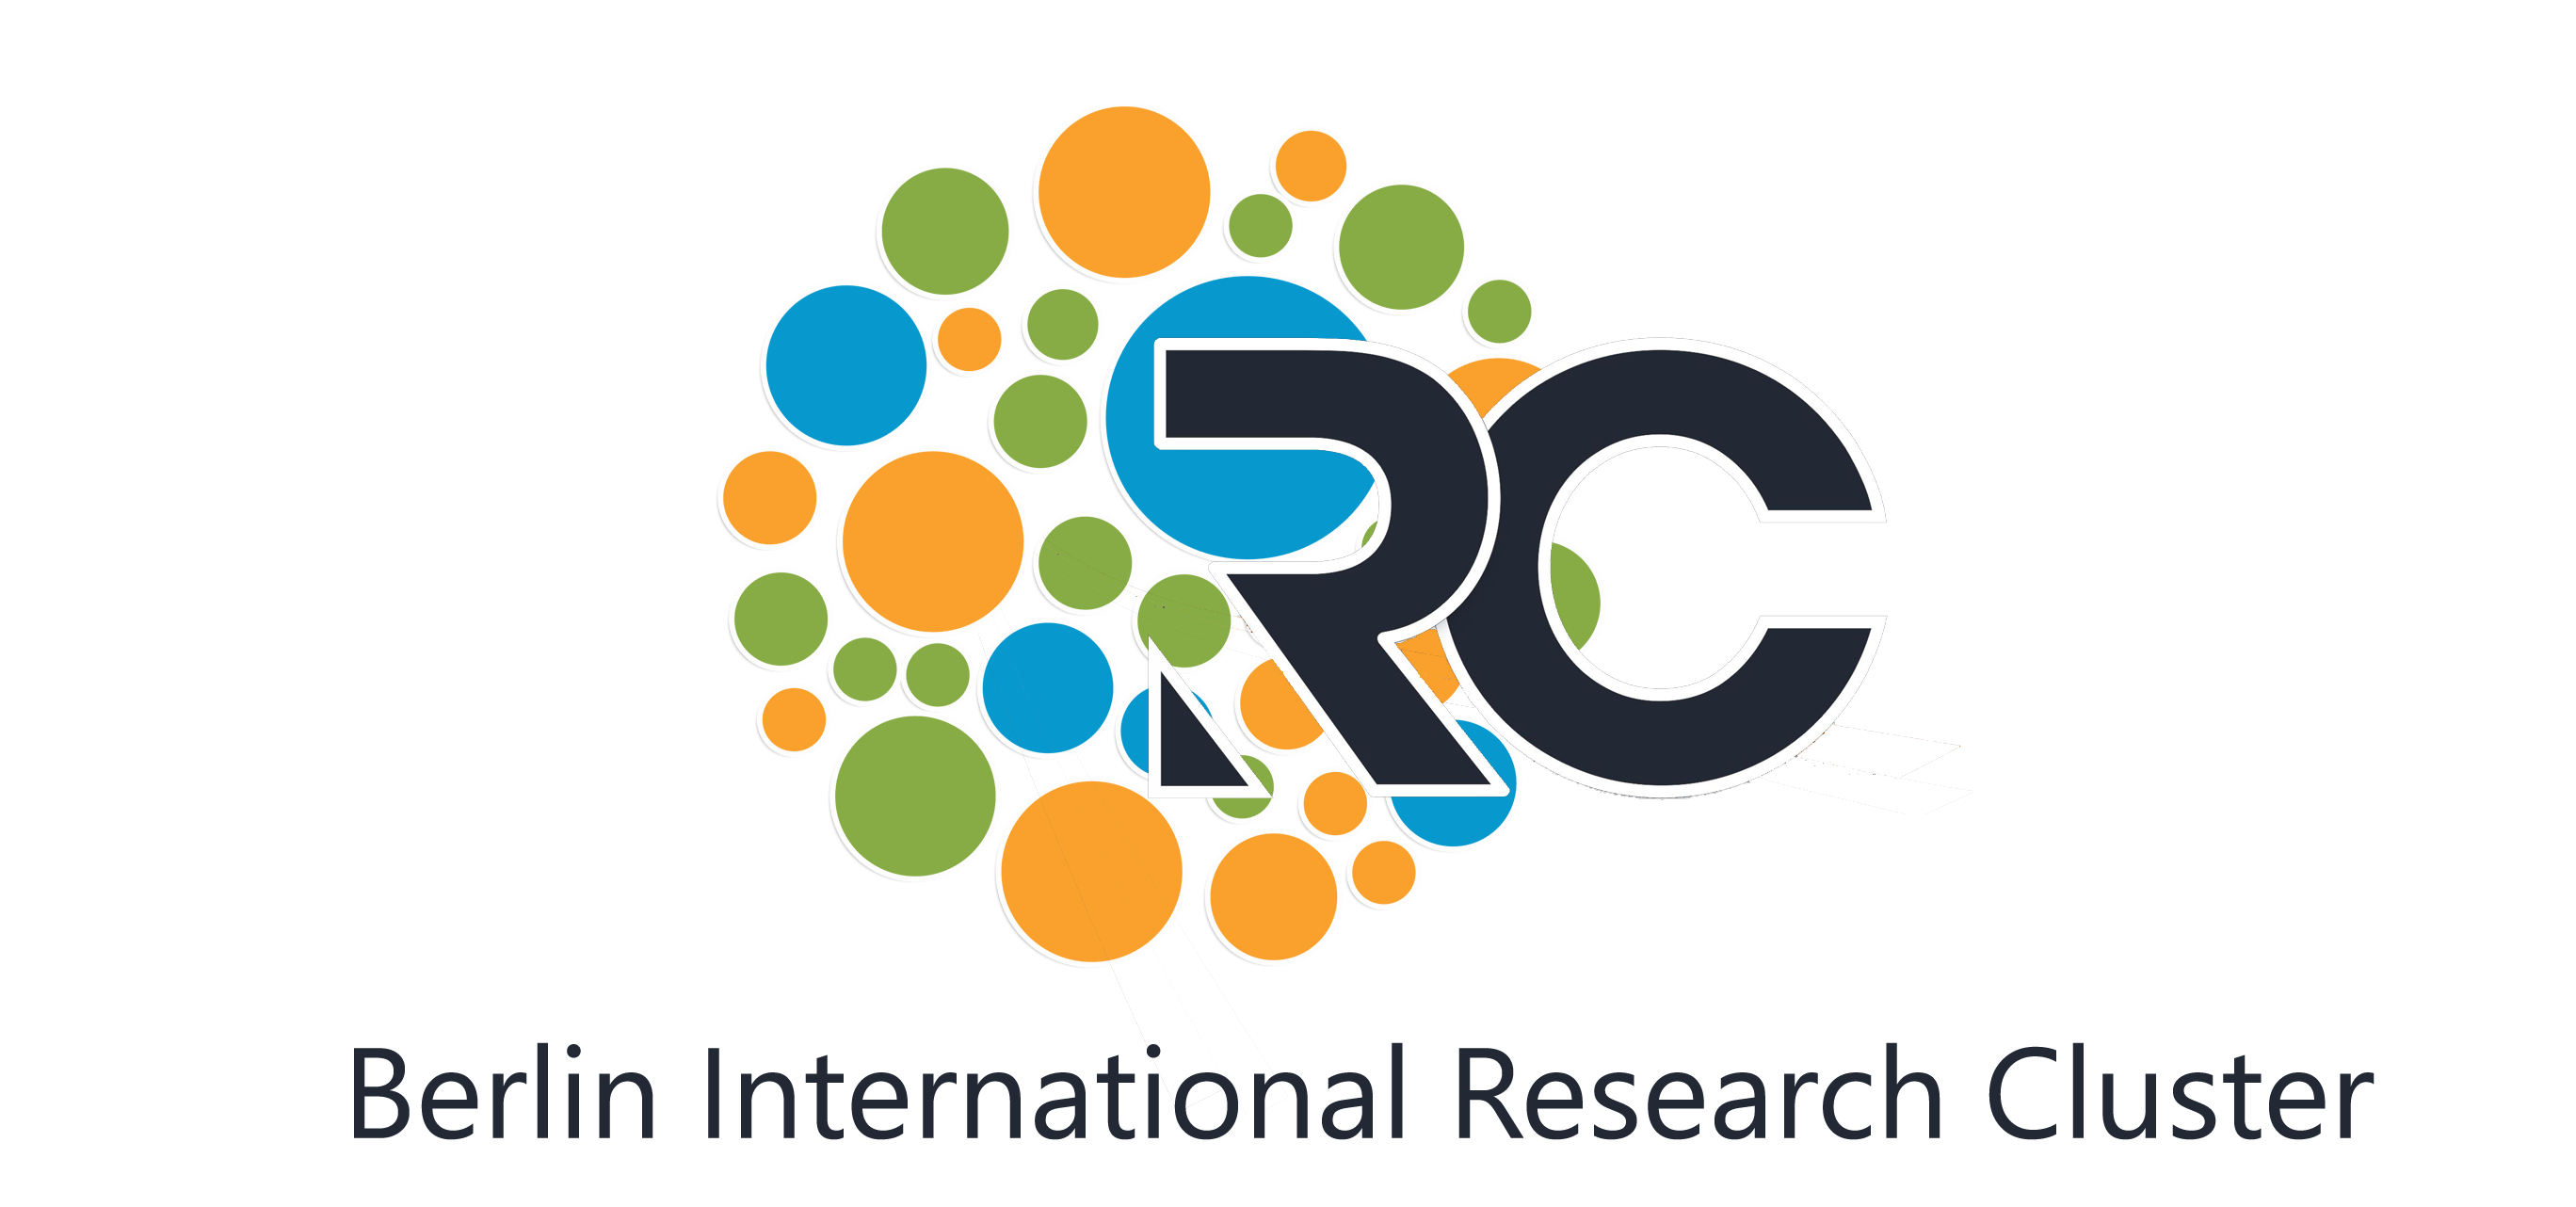 3rd International conference on Multidisciplinary Research Approaches in Social Sciences and Business Management